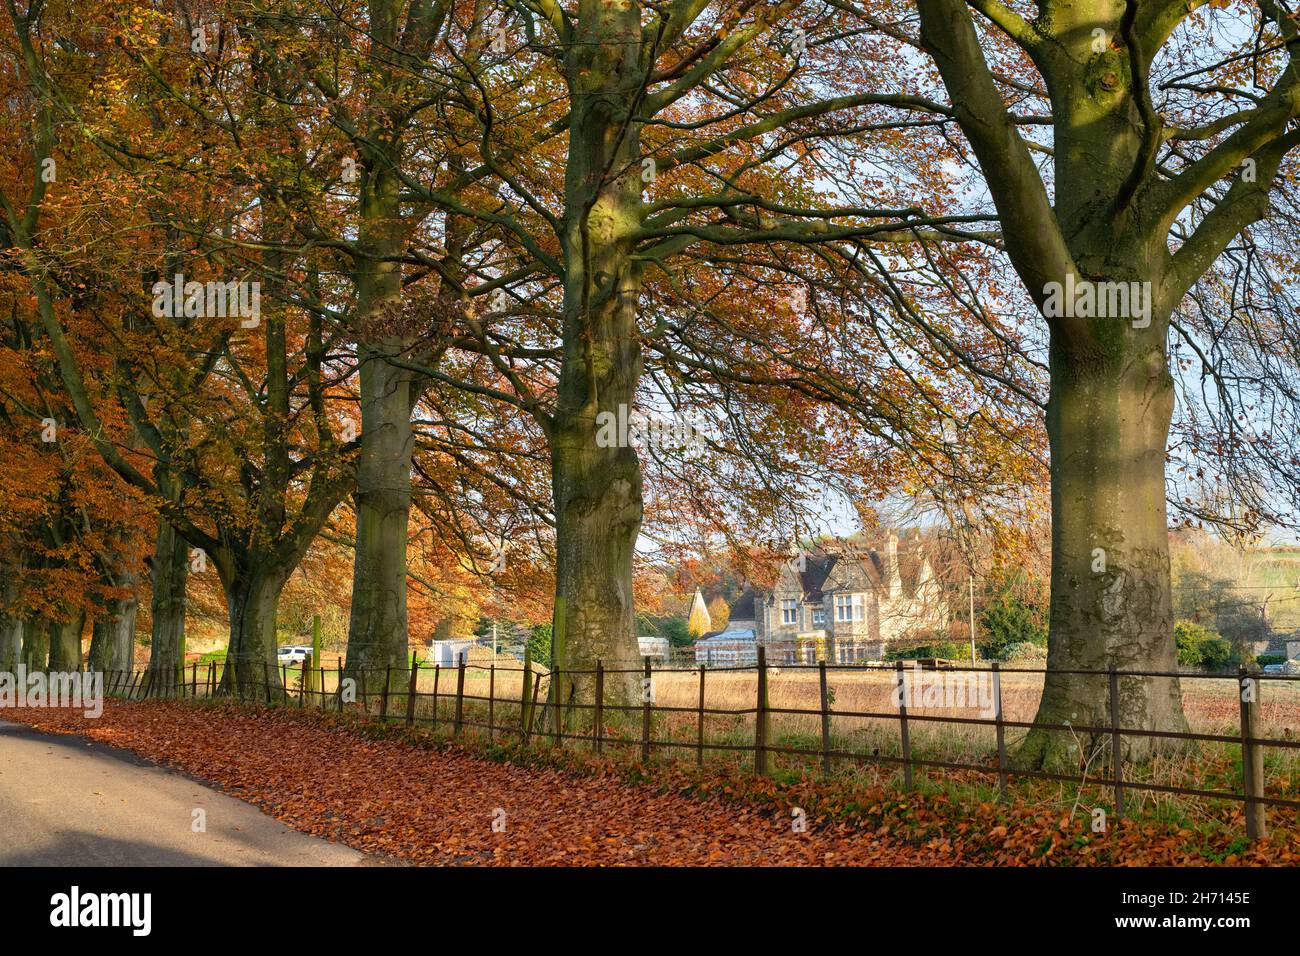 Autumn beech trees in Asthall, Cotswolds, Oxfordshire, England Stock Photo